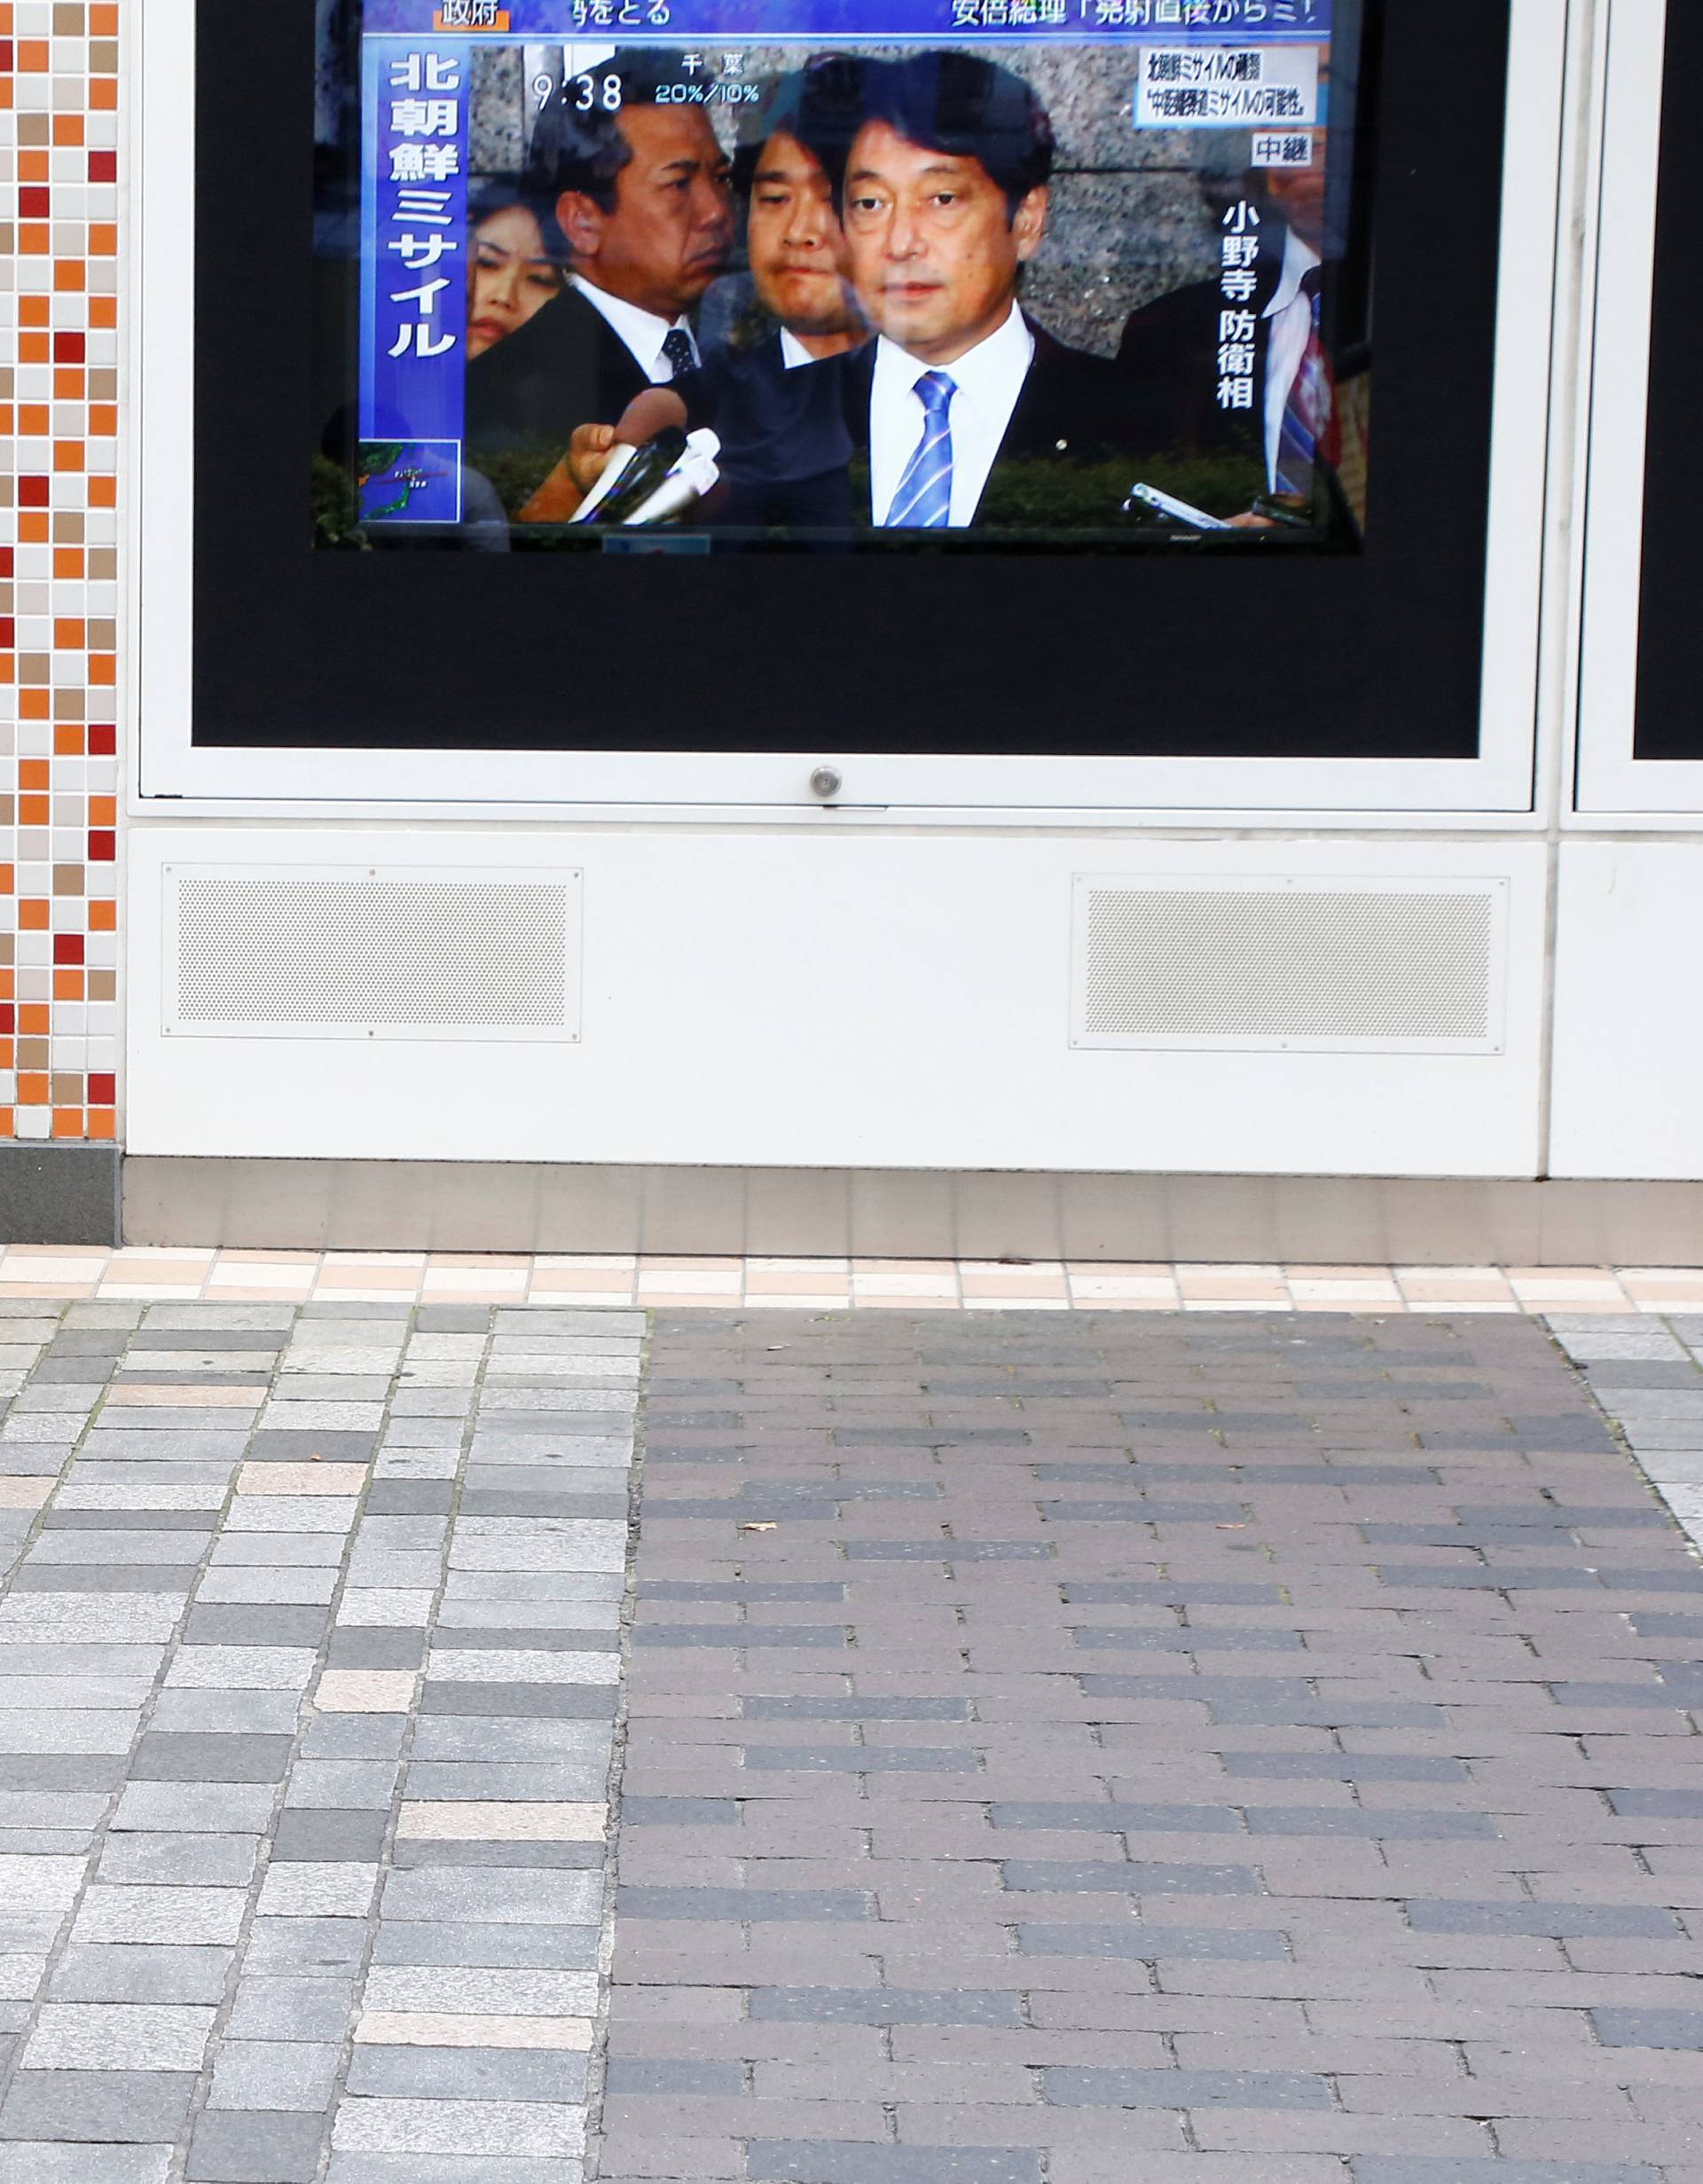 Pedestrian walks past a TV set showing news about North Korea's missile launch in Tokyo